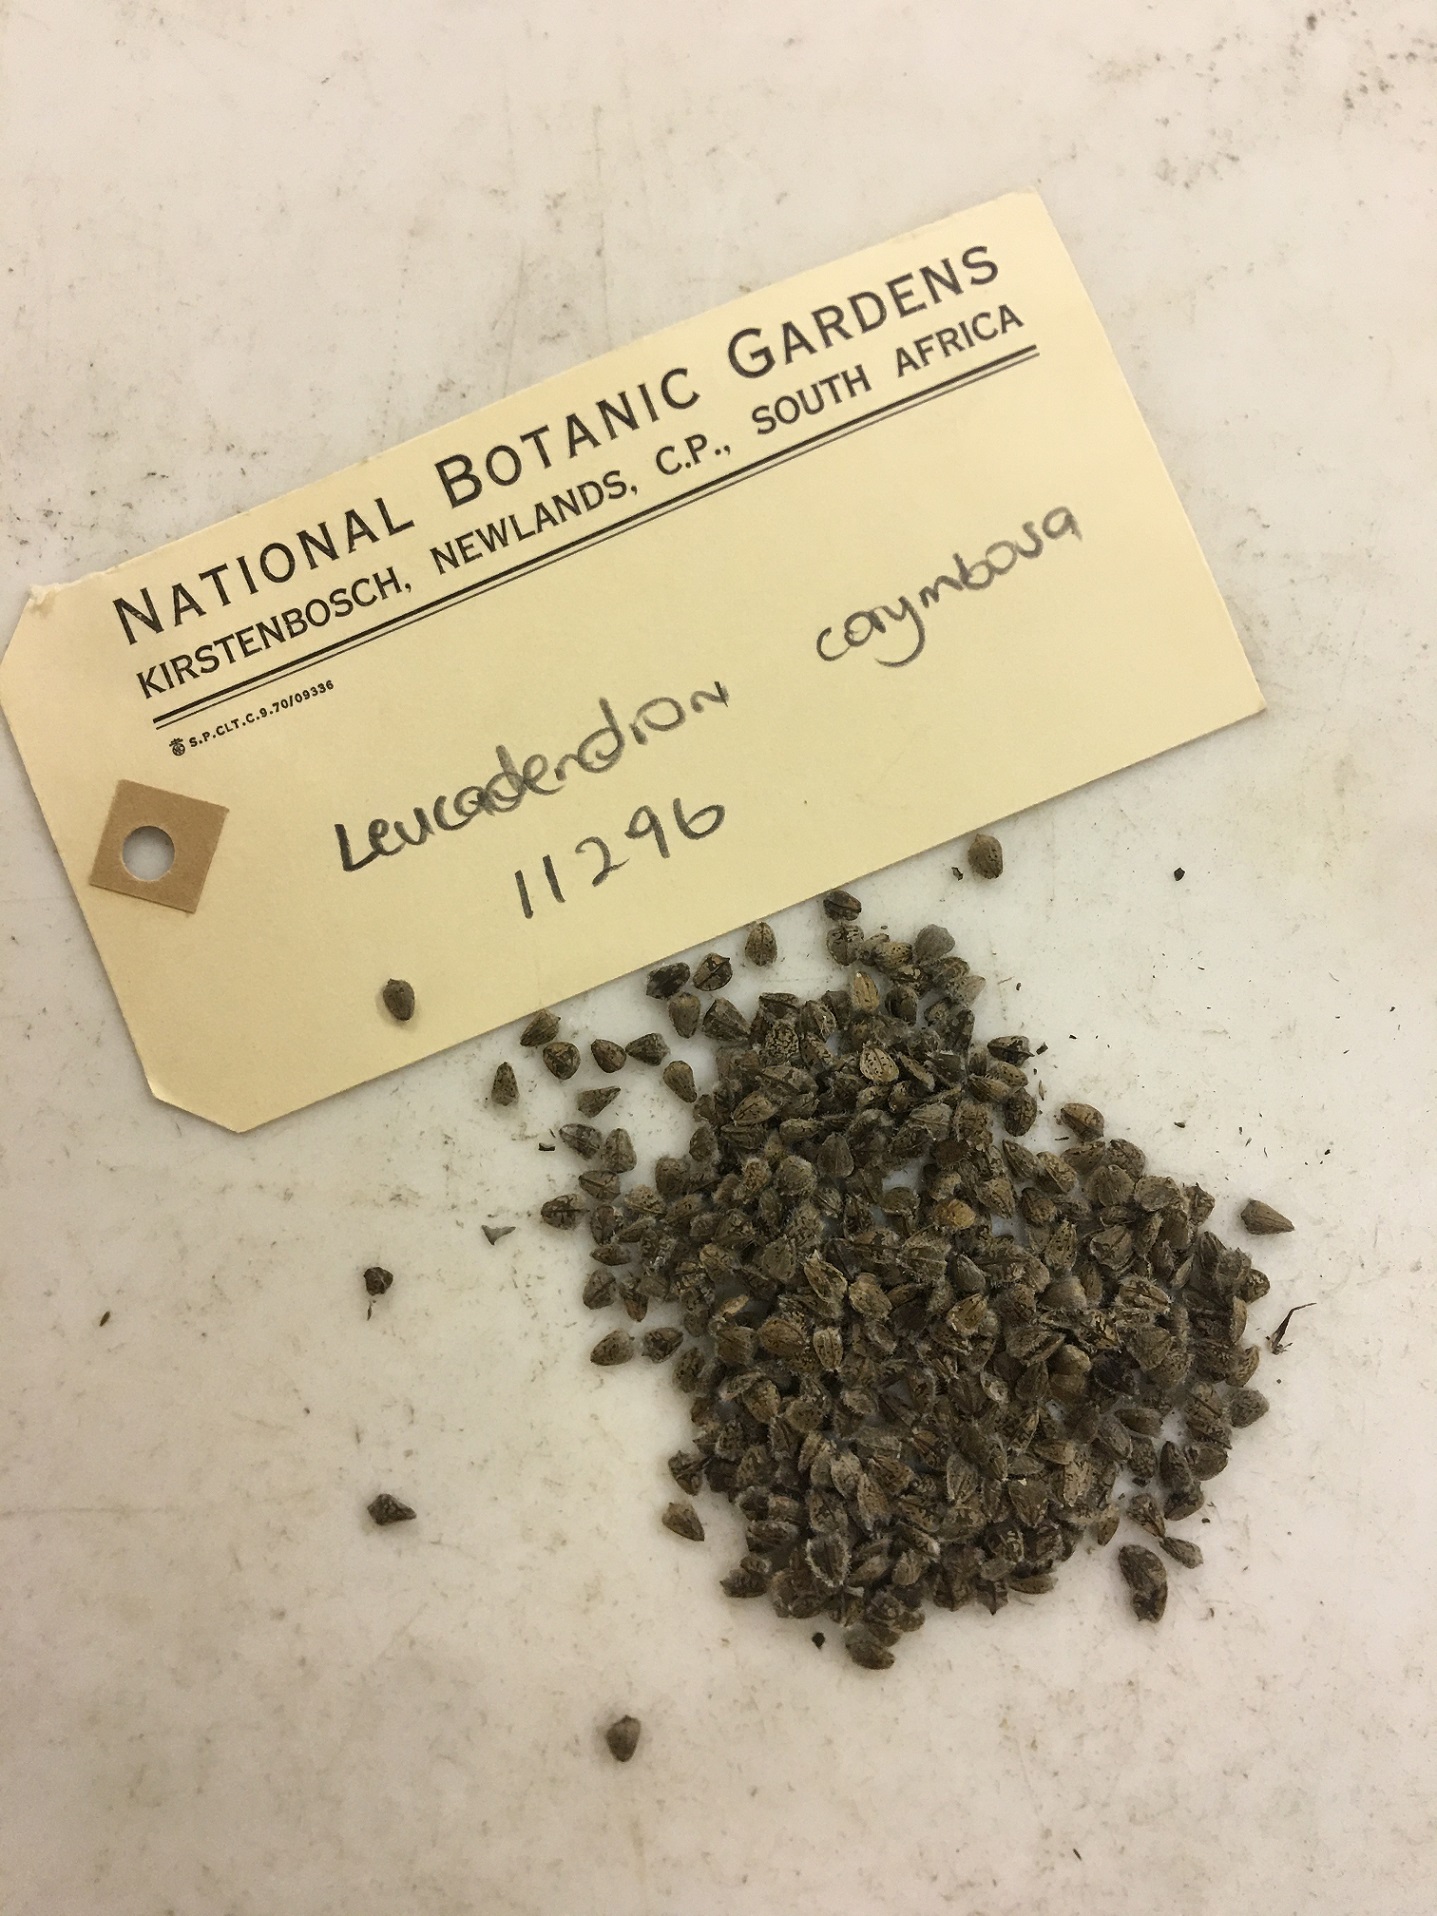 A luggage style label reading National Botanic Gardens Kirstenbosch, Newlands, C.P., South Africa Leucadendron corymbosa 11296. Below the label is a piloe of dark triangular shaped seeds